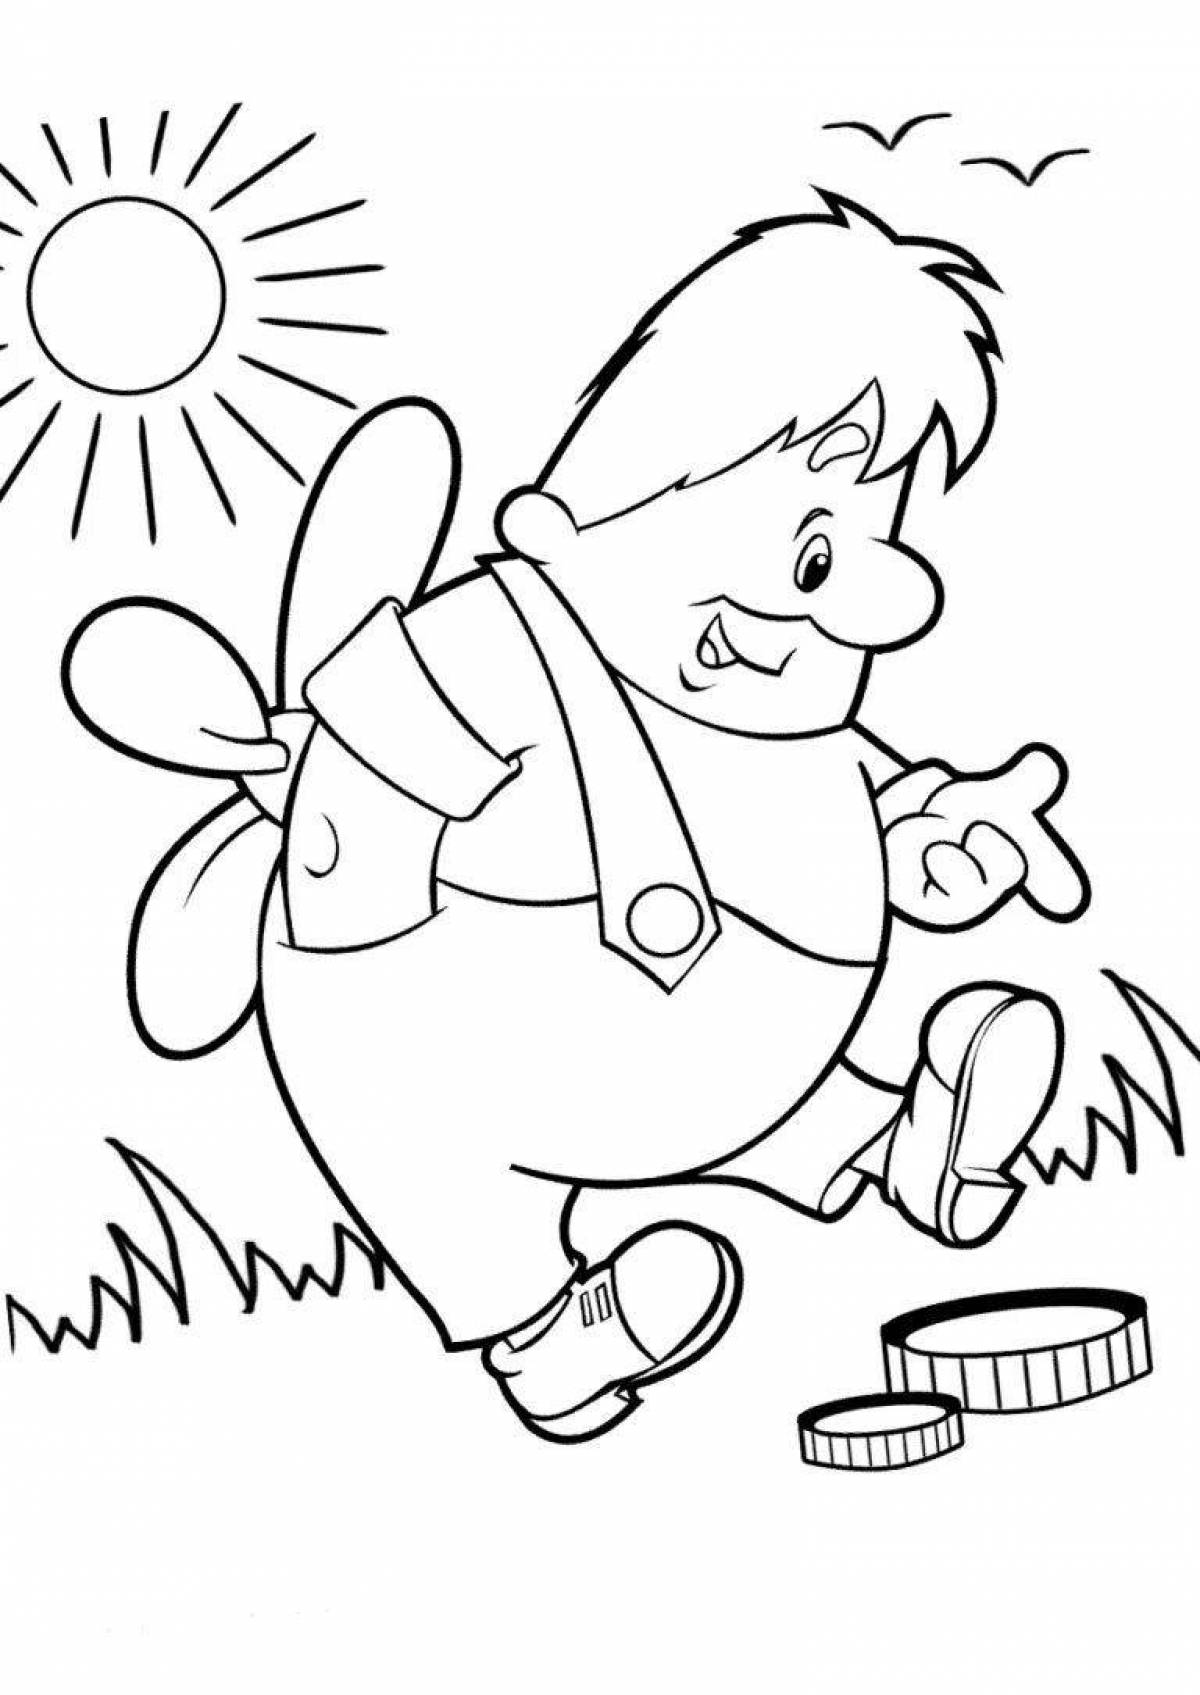 Exciting cartoon coloring pages for 3-4 year olds